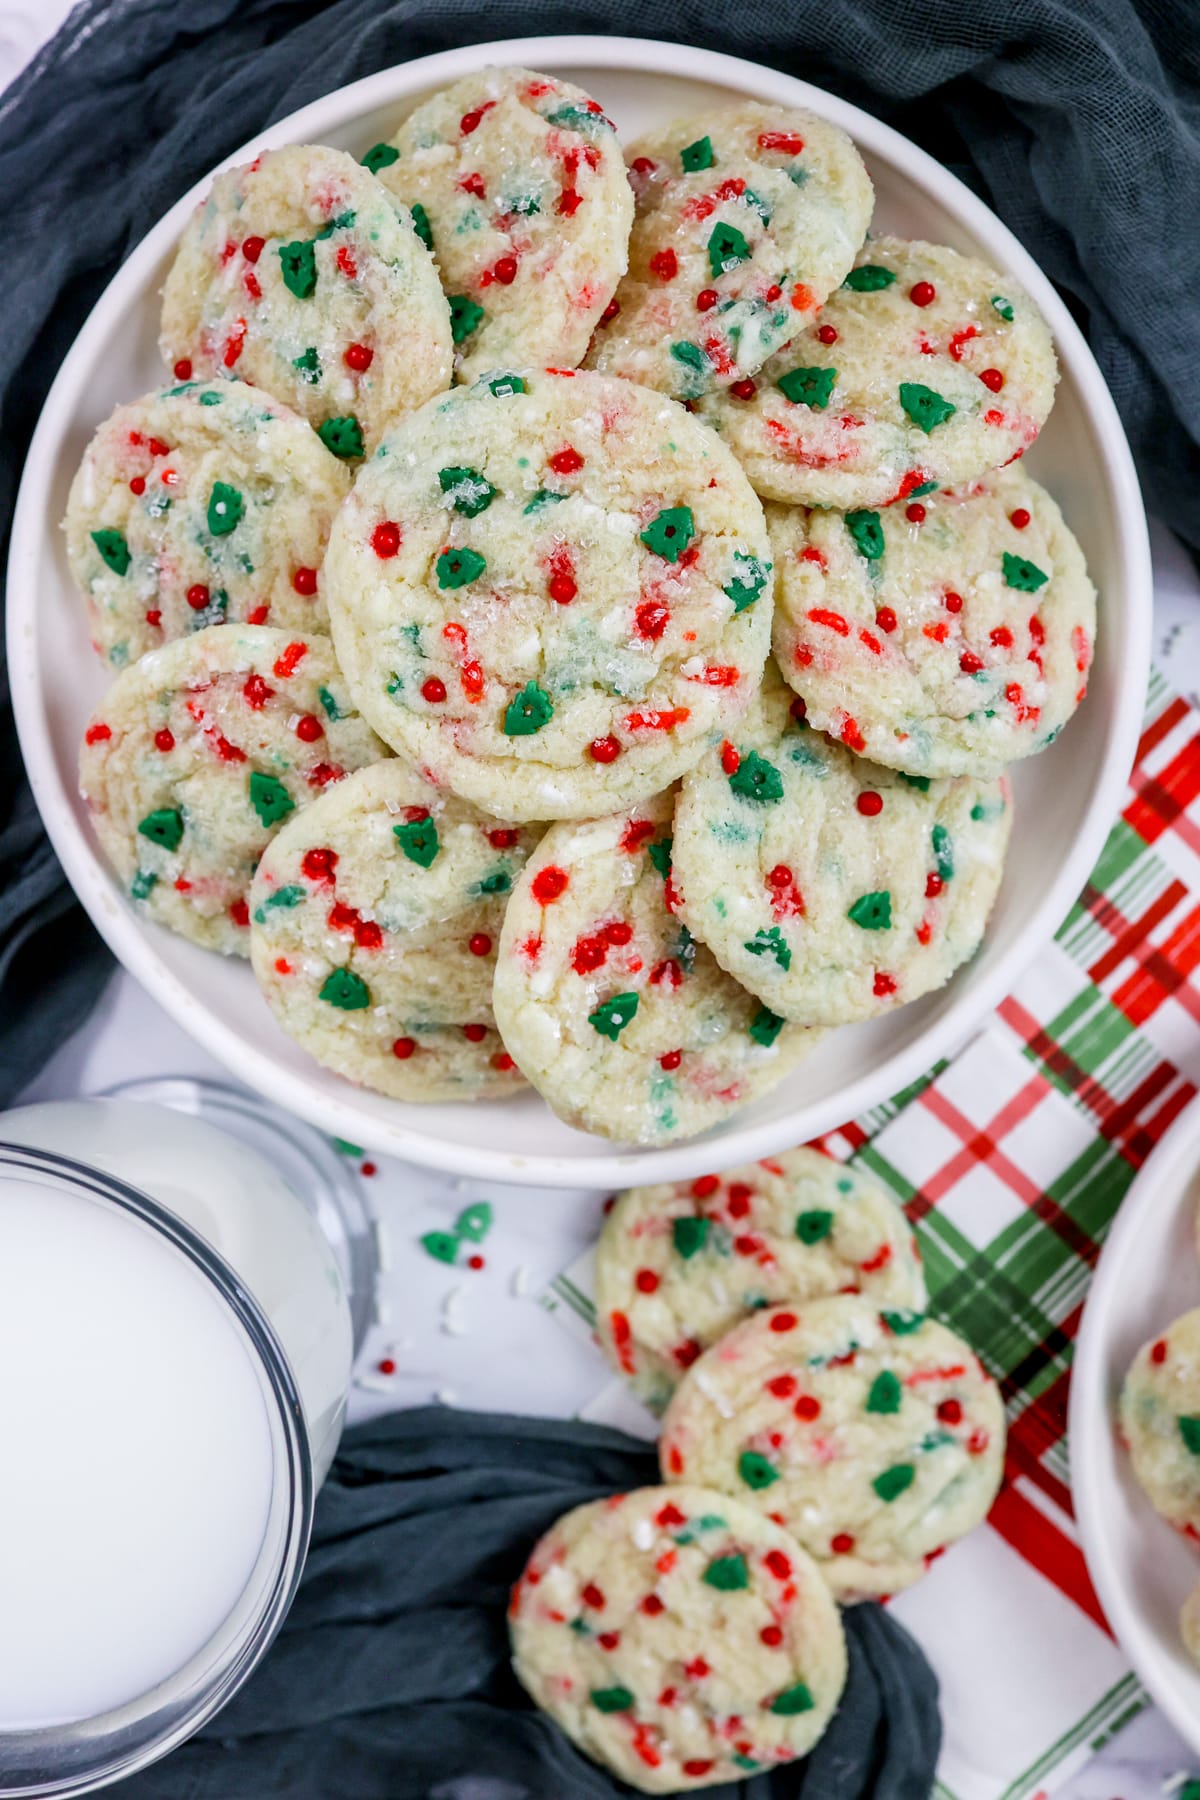 Top view of Christmas Sugar Cookies in a bowl on a table.